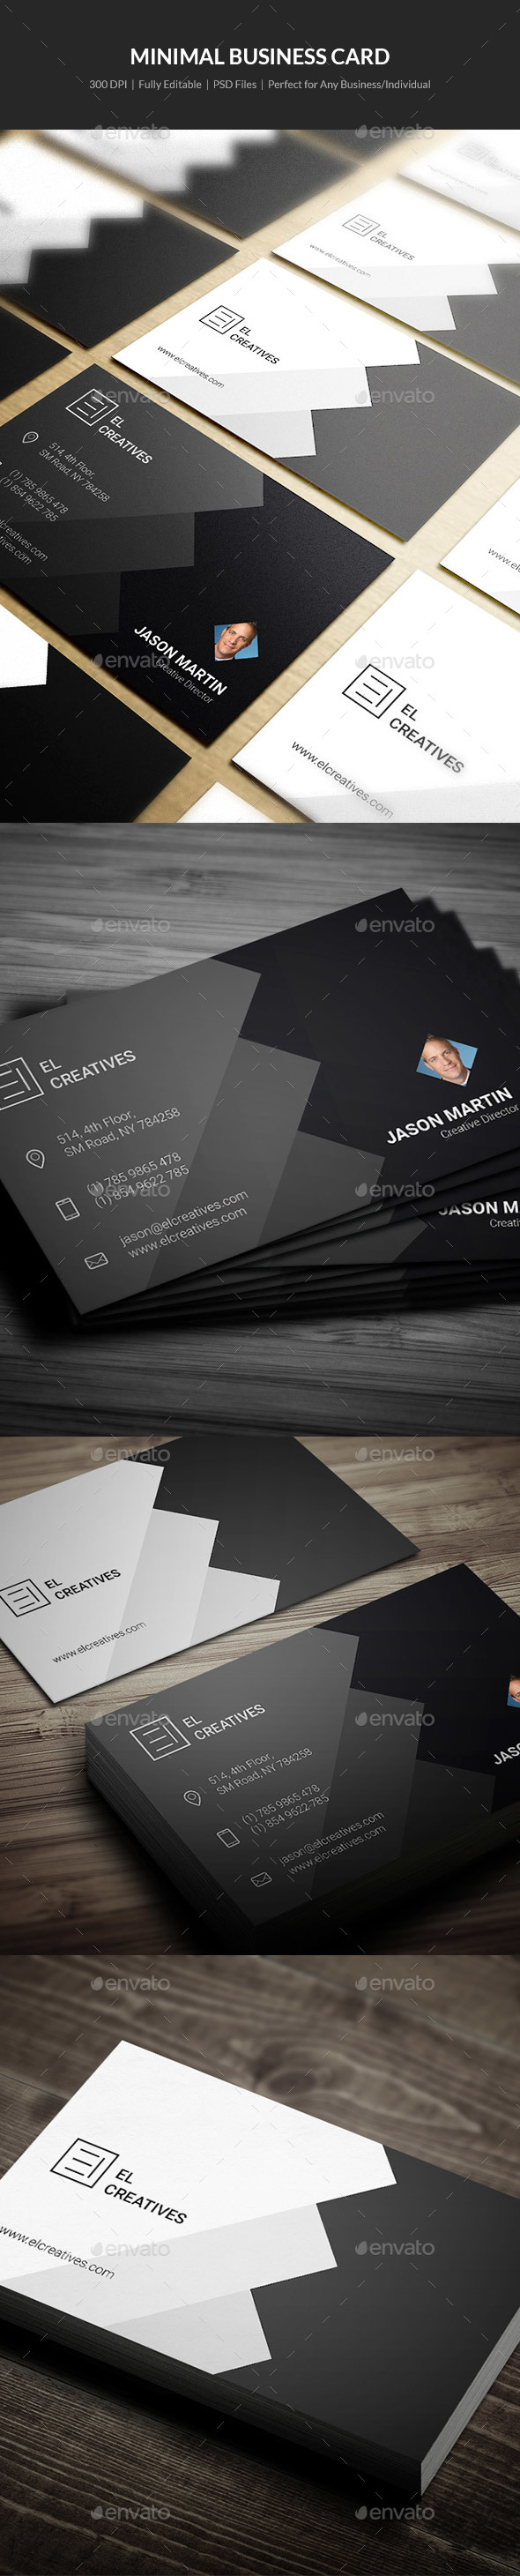 GraphicRiver Minimal Business Card 01 21196504